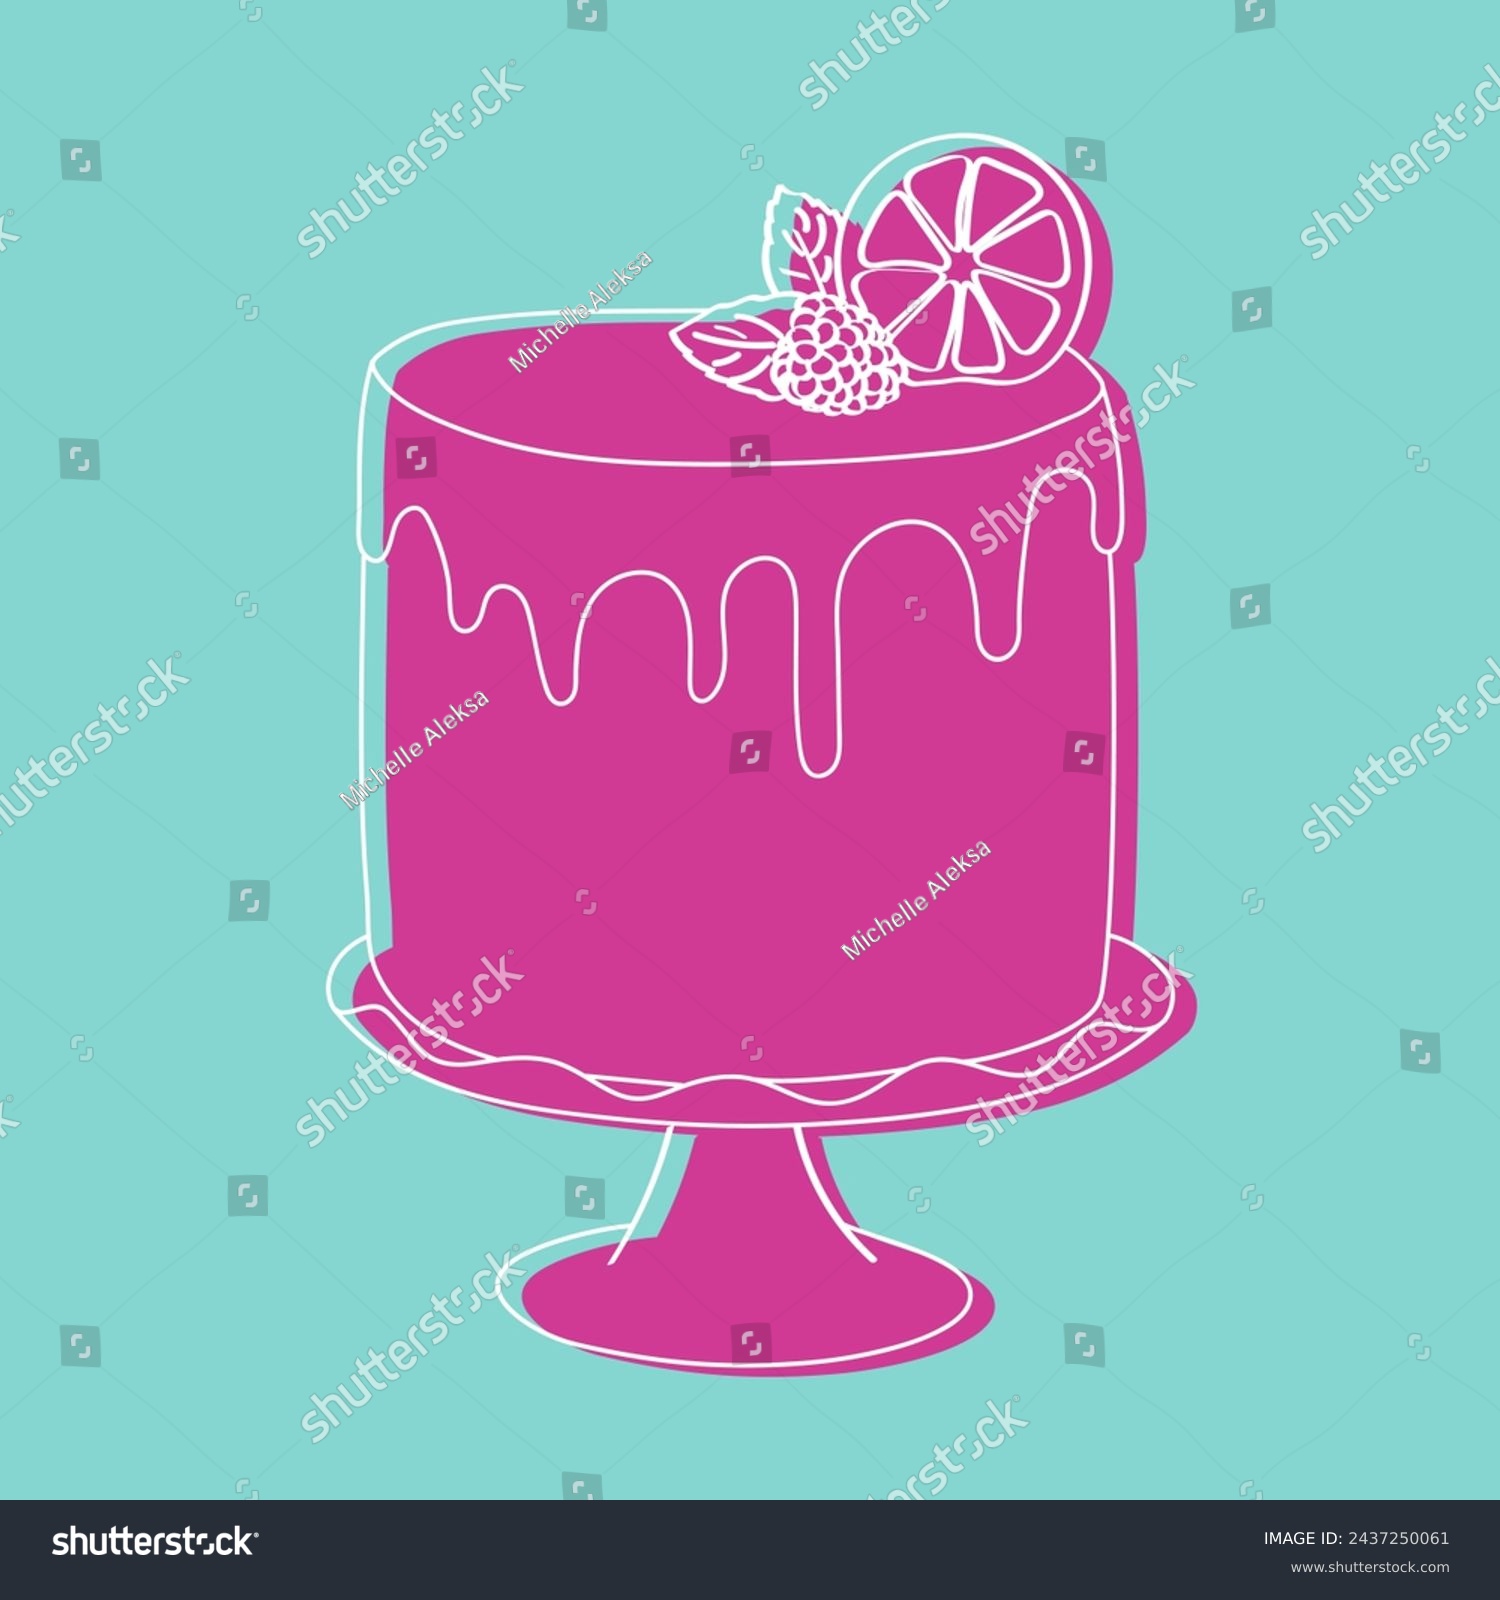 A pink handpainted cake with a slice of lemon resting on top of it. The cake is decorated with intricate doodle designs, and the vibrant yellow lemon slice adds a pop of color to the dessert #2437250061